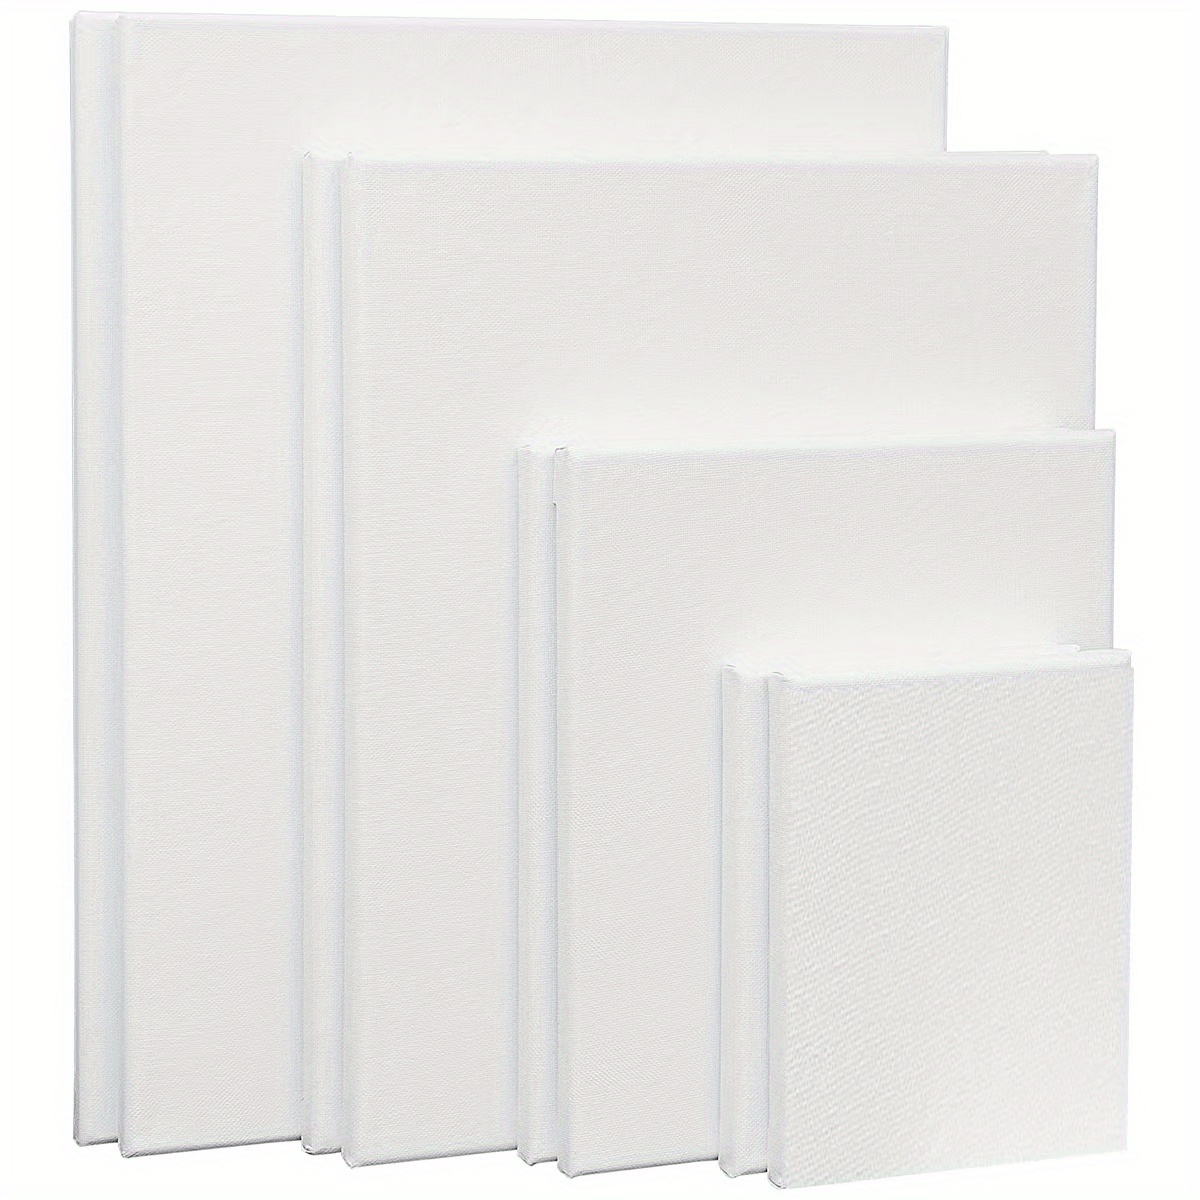 MEECI 3 Pack Canvases for Painting with 8x10, Stretched Blank Canvas Framed  White Canvas Boards Painting Supplies Art Board Paint Canvas Panels DIY